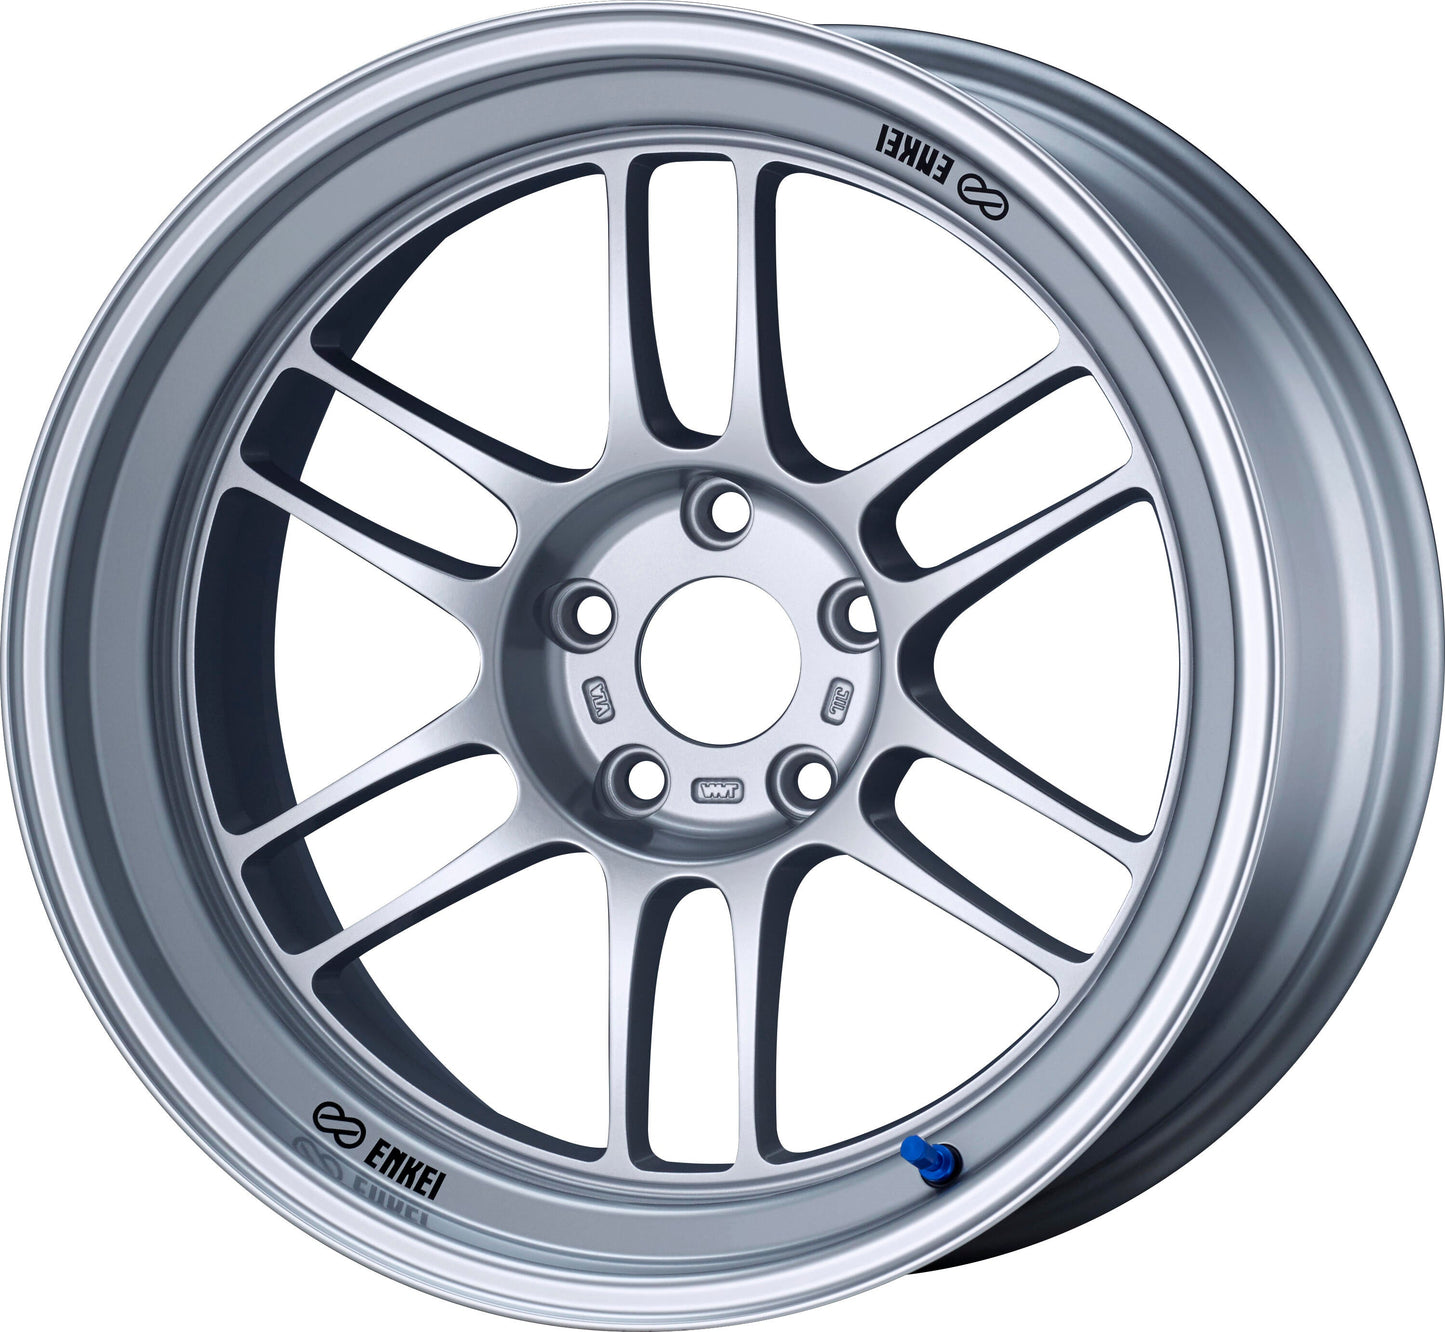 ENKEI RPF1 RS SILVER 18x10 +6 5-114.3 ***PRE-ORDER ARRIVAL END OF FEBRUARY***